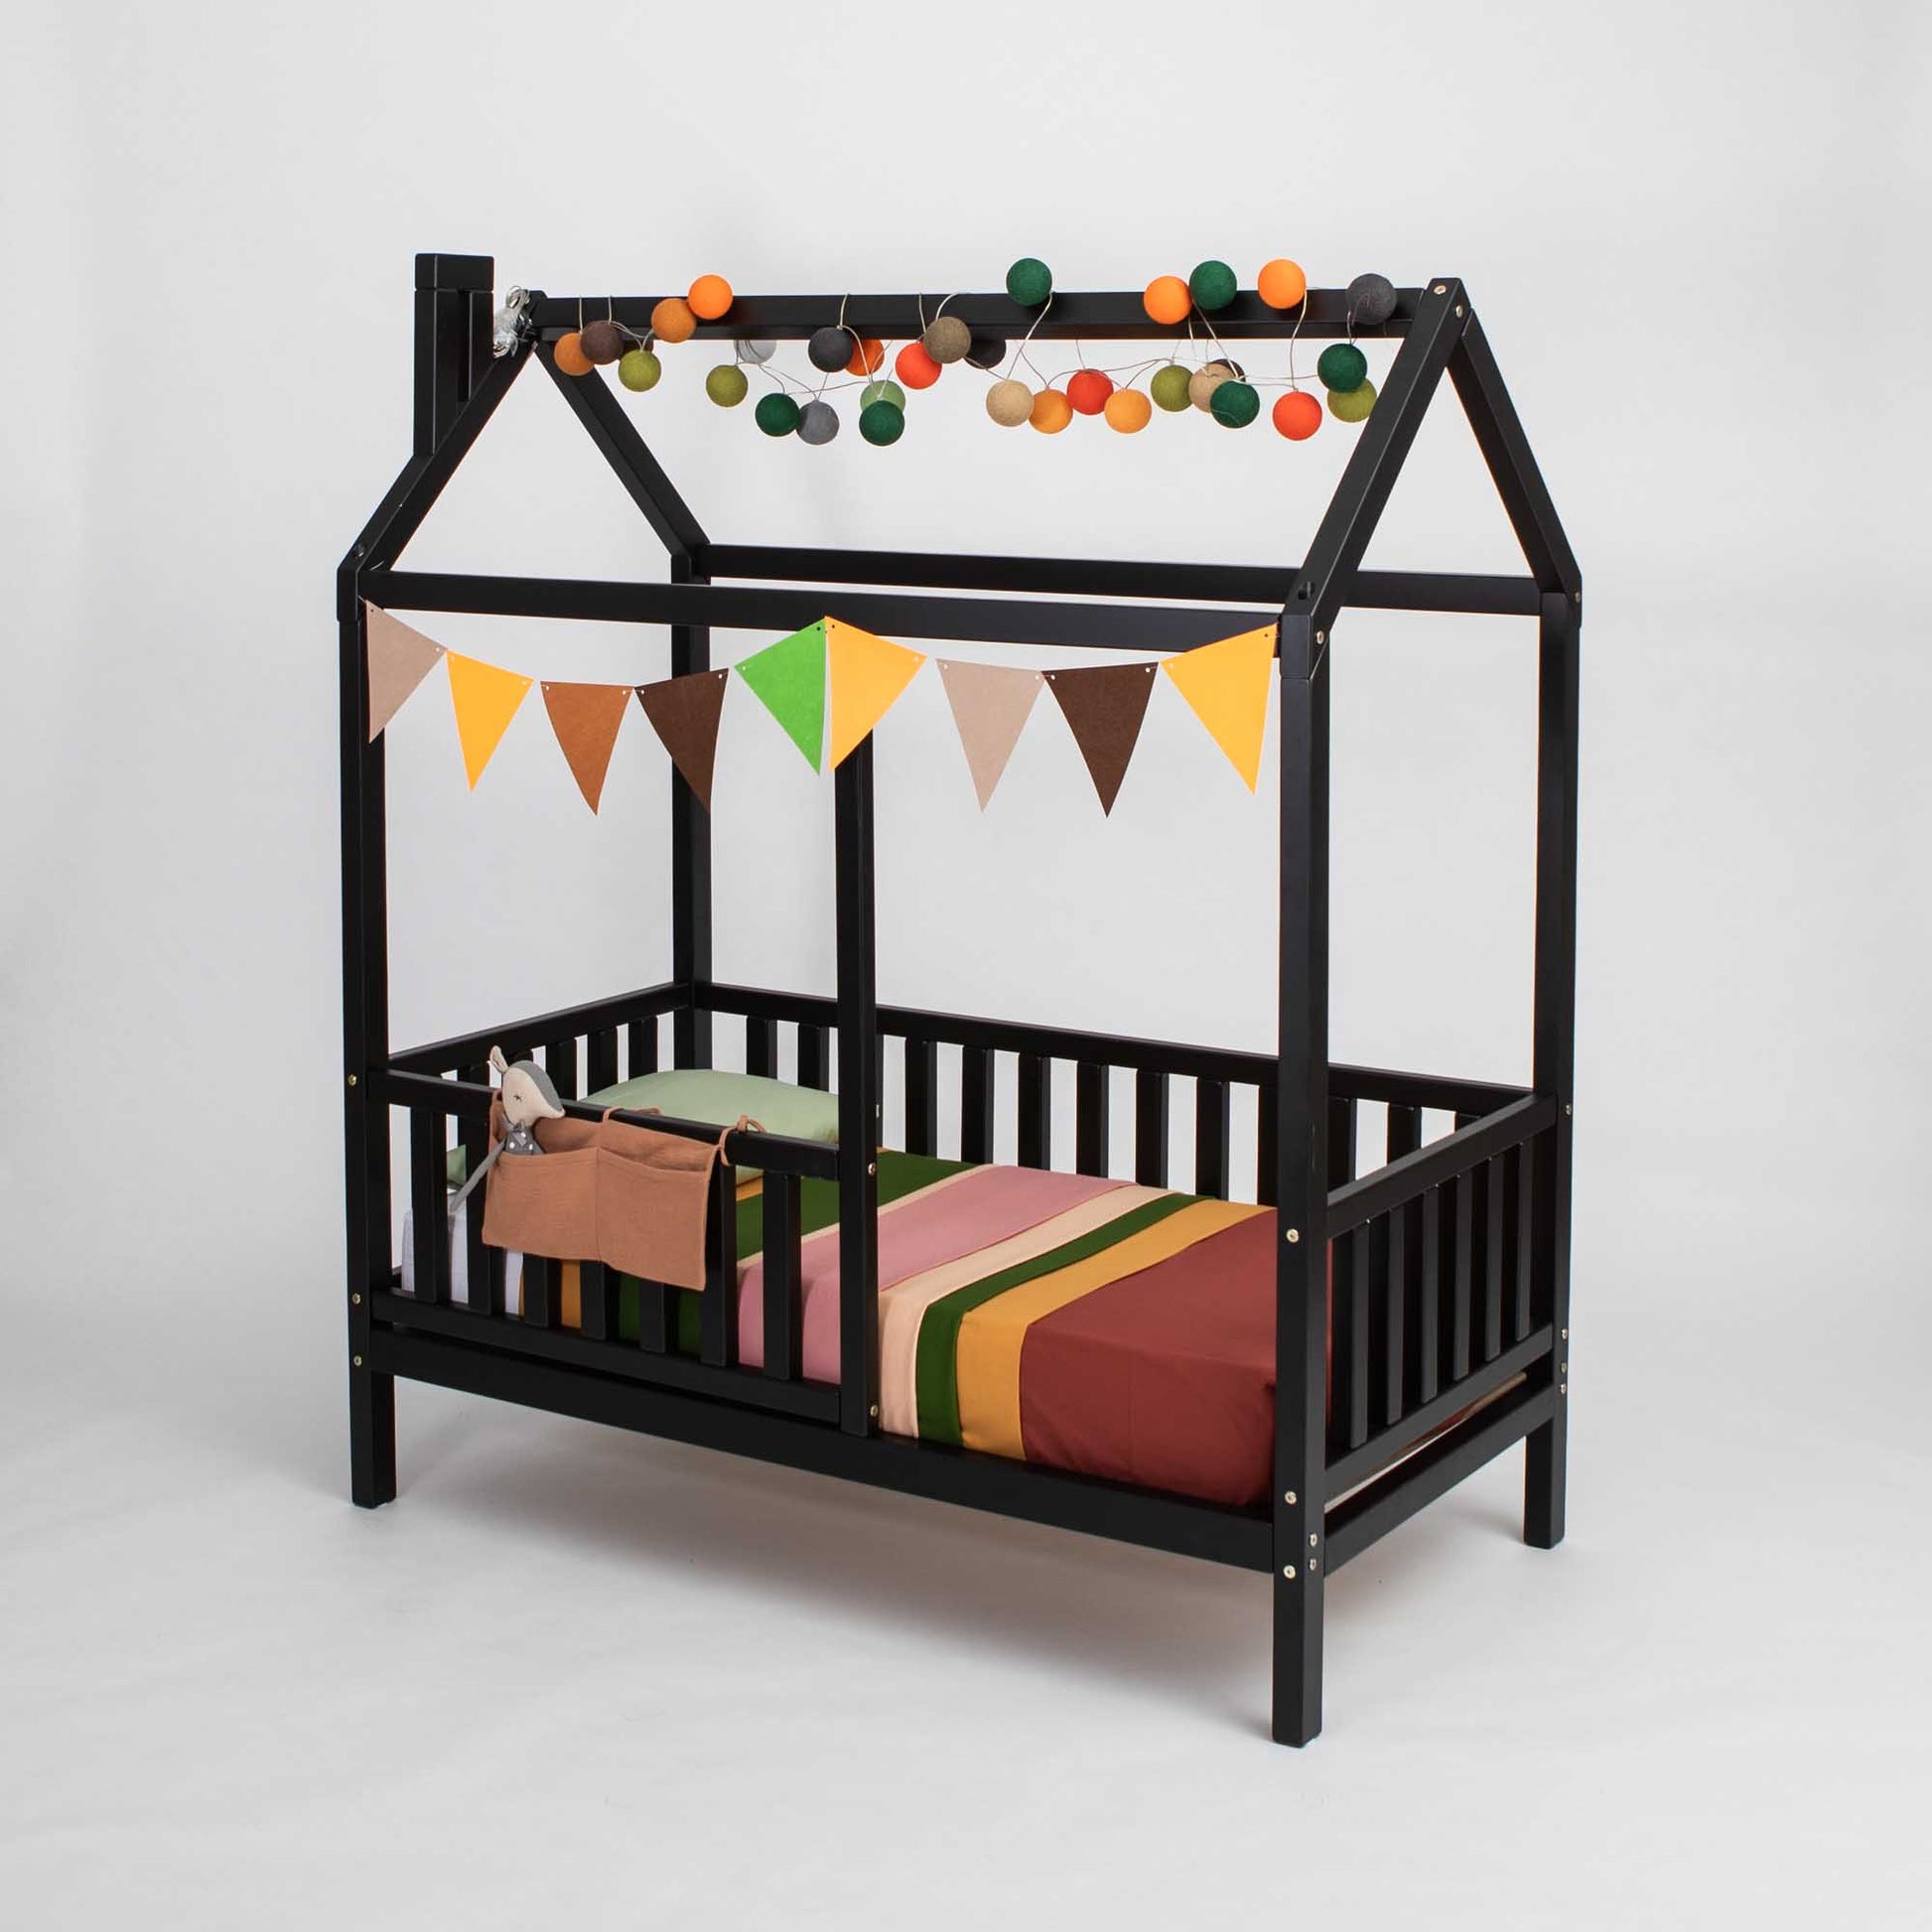 A black Kids' house bed on legs with a fence, with a canopy and bunting.